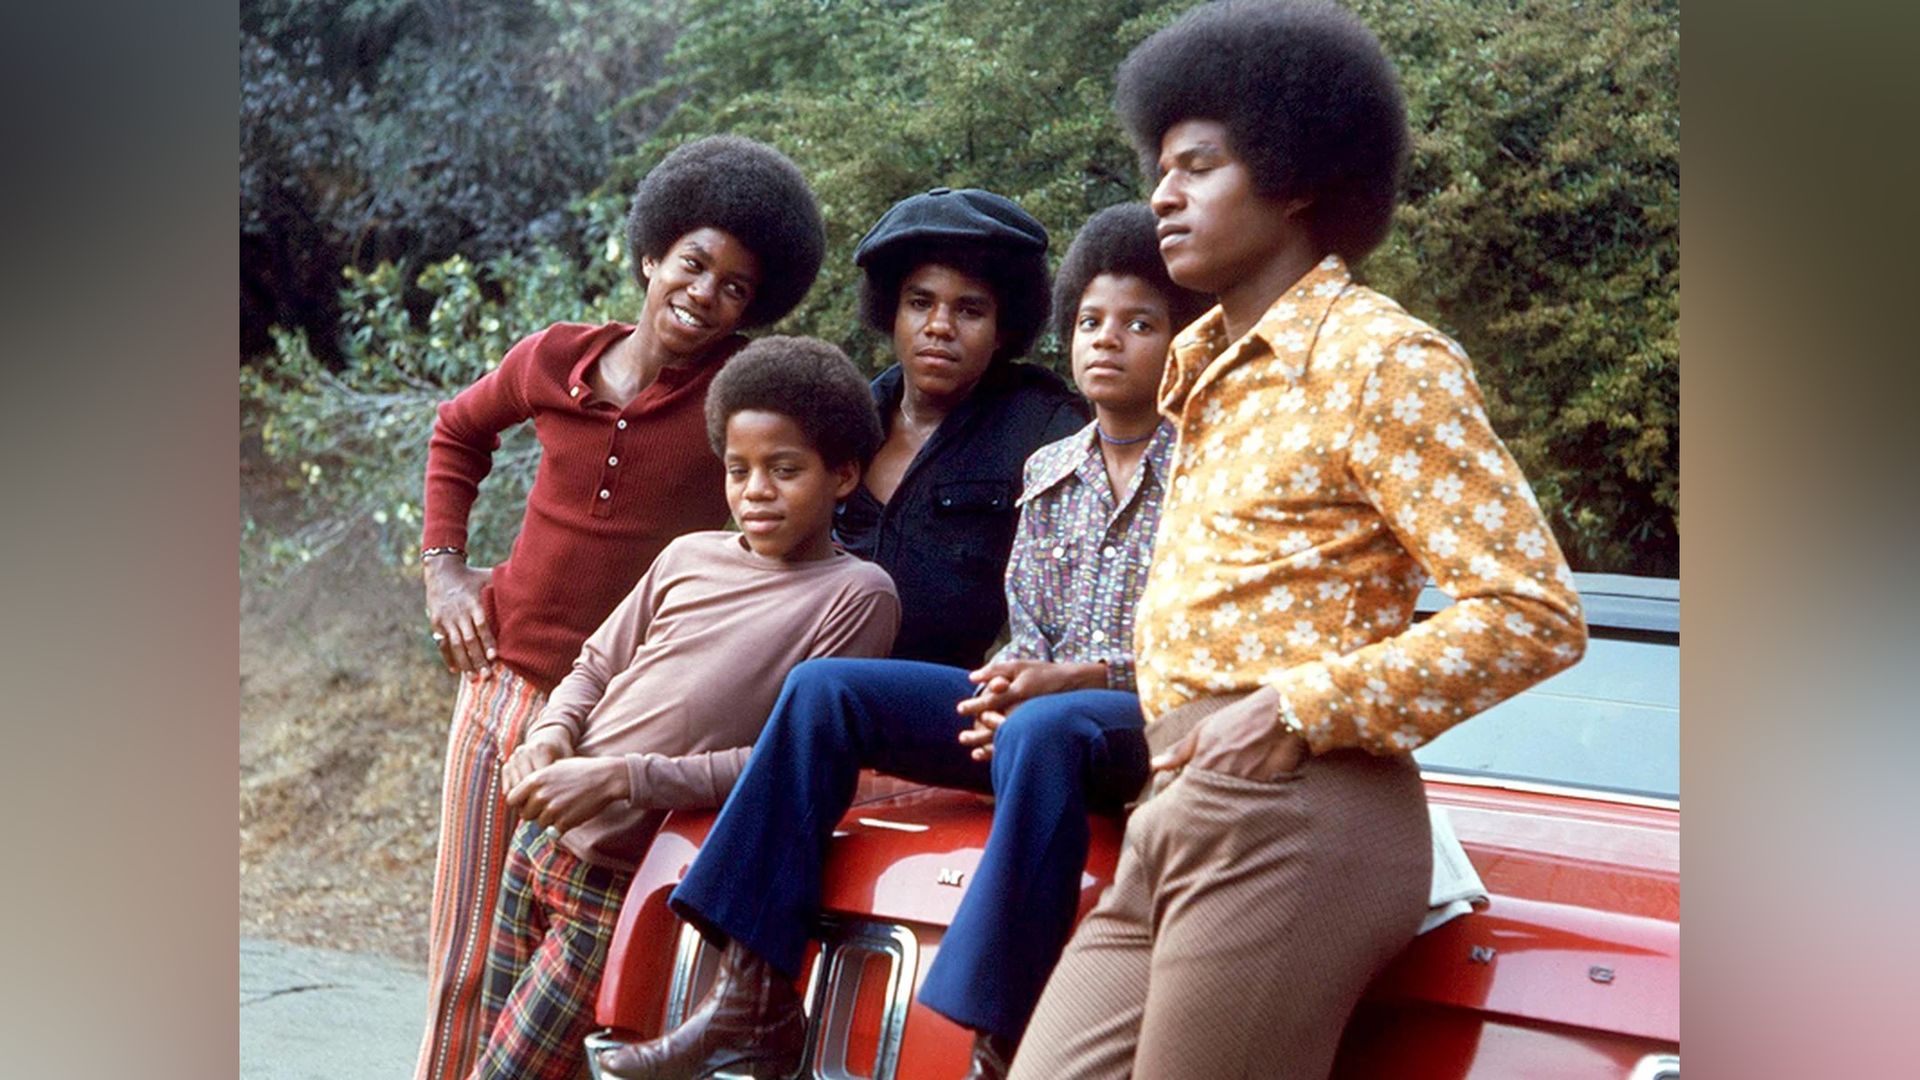 The Jackson brothers rehearsed tirelessly, fearing their strict father